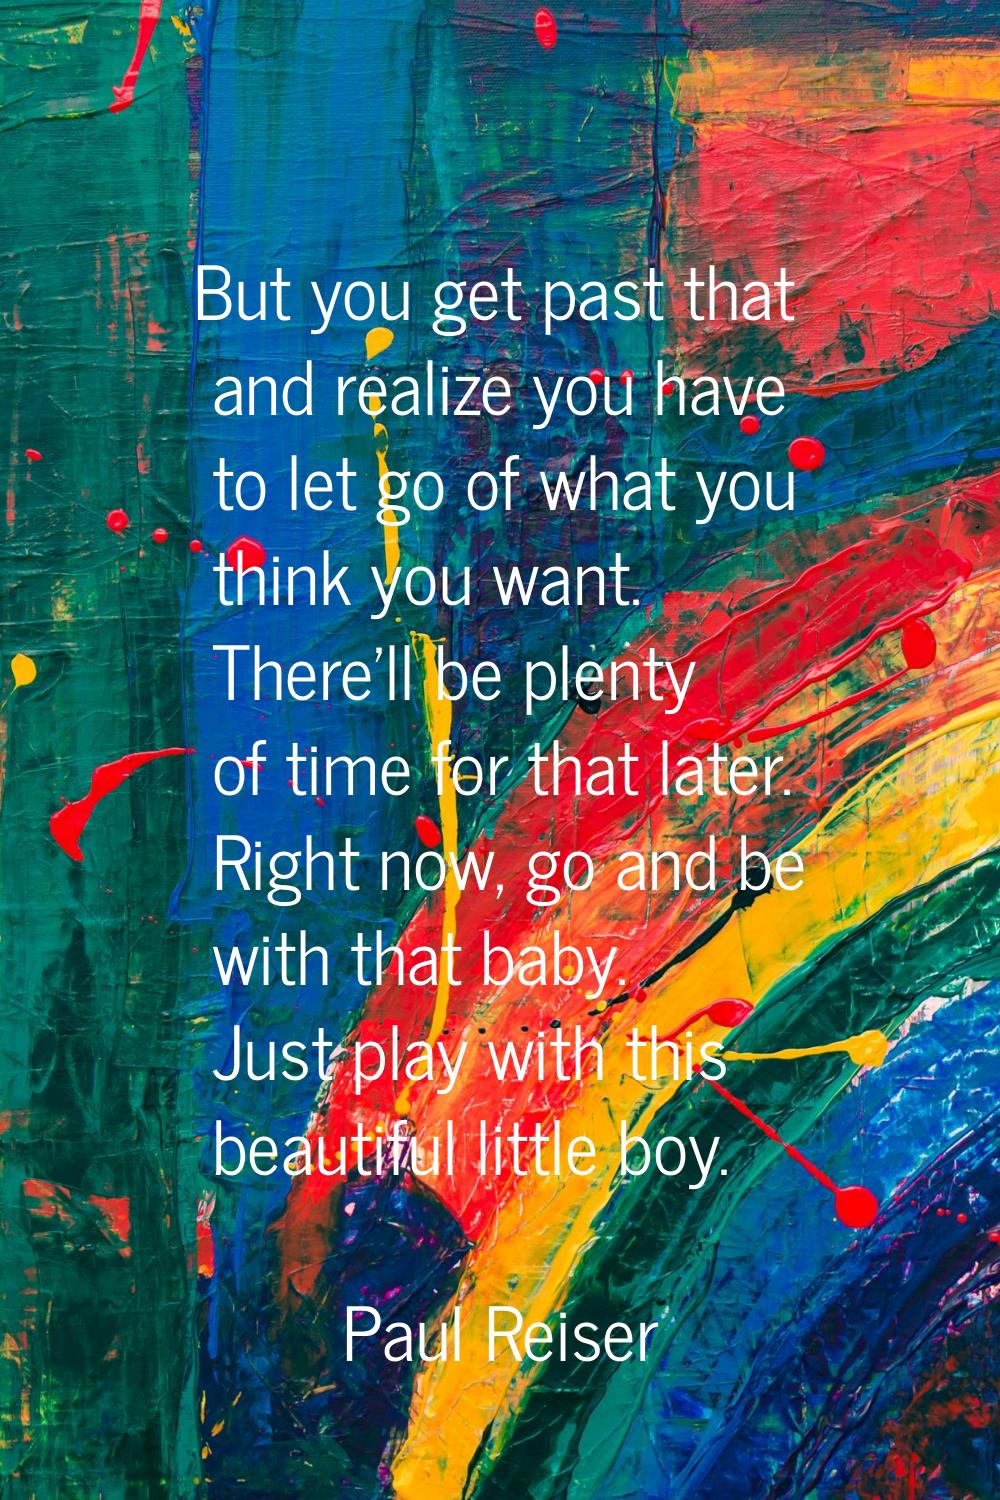 But you get past that and realize you have to let go of what you think you want. There'll be plenty